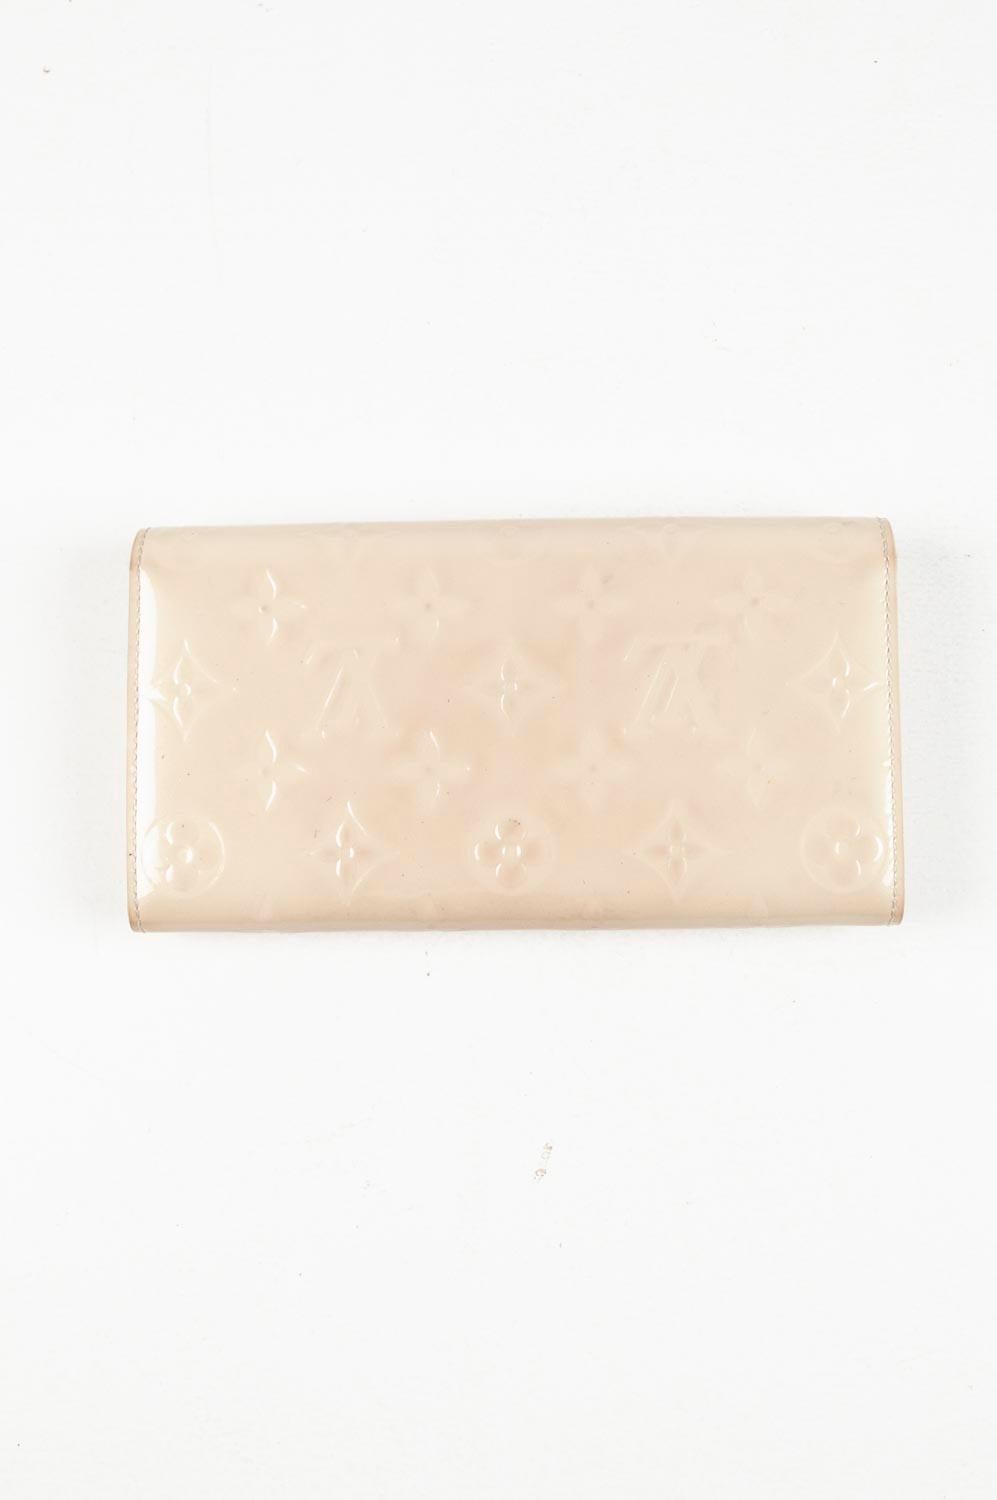 Louis Vuitton Woman Monogram Wallet Patent Leather,  S421 In Good Condition For Sale In Kaunas, LT